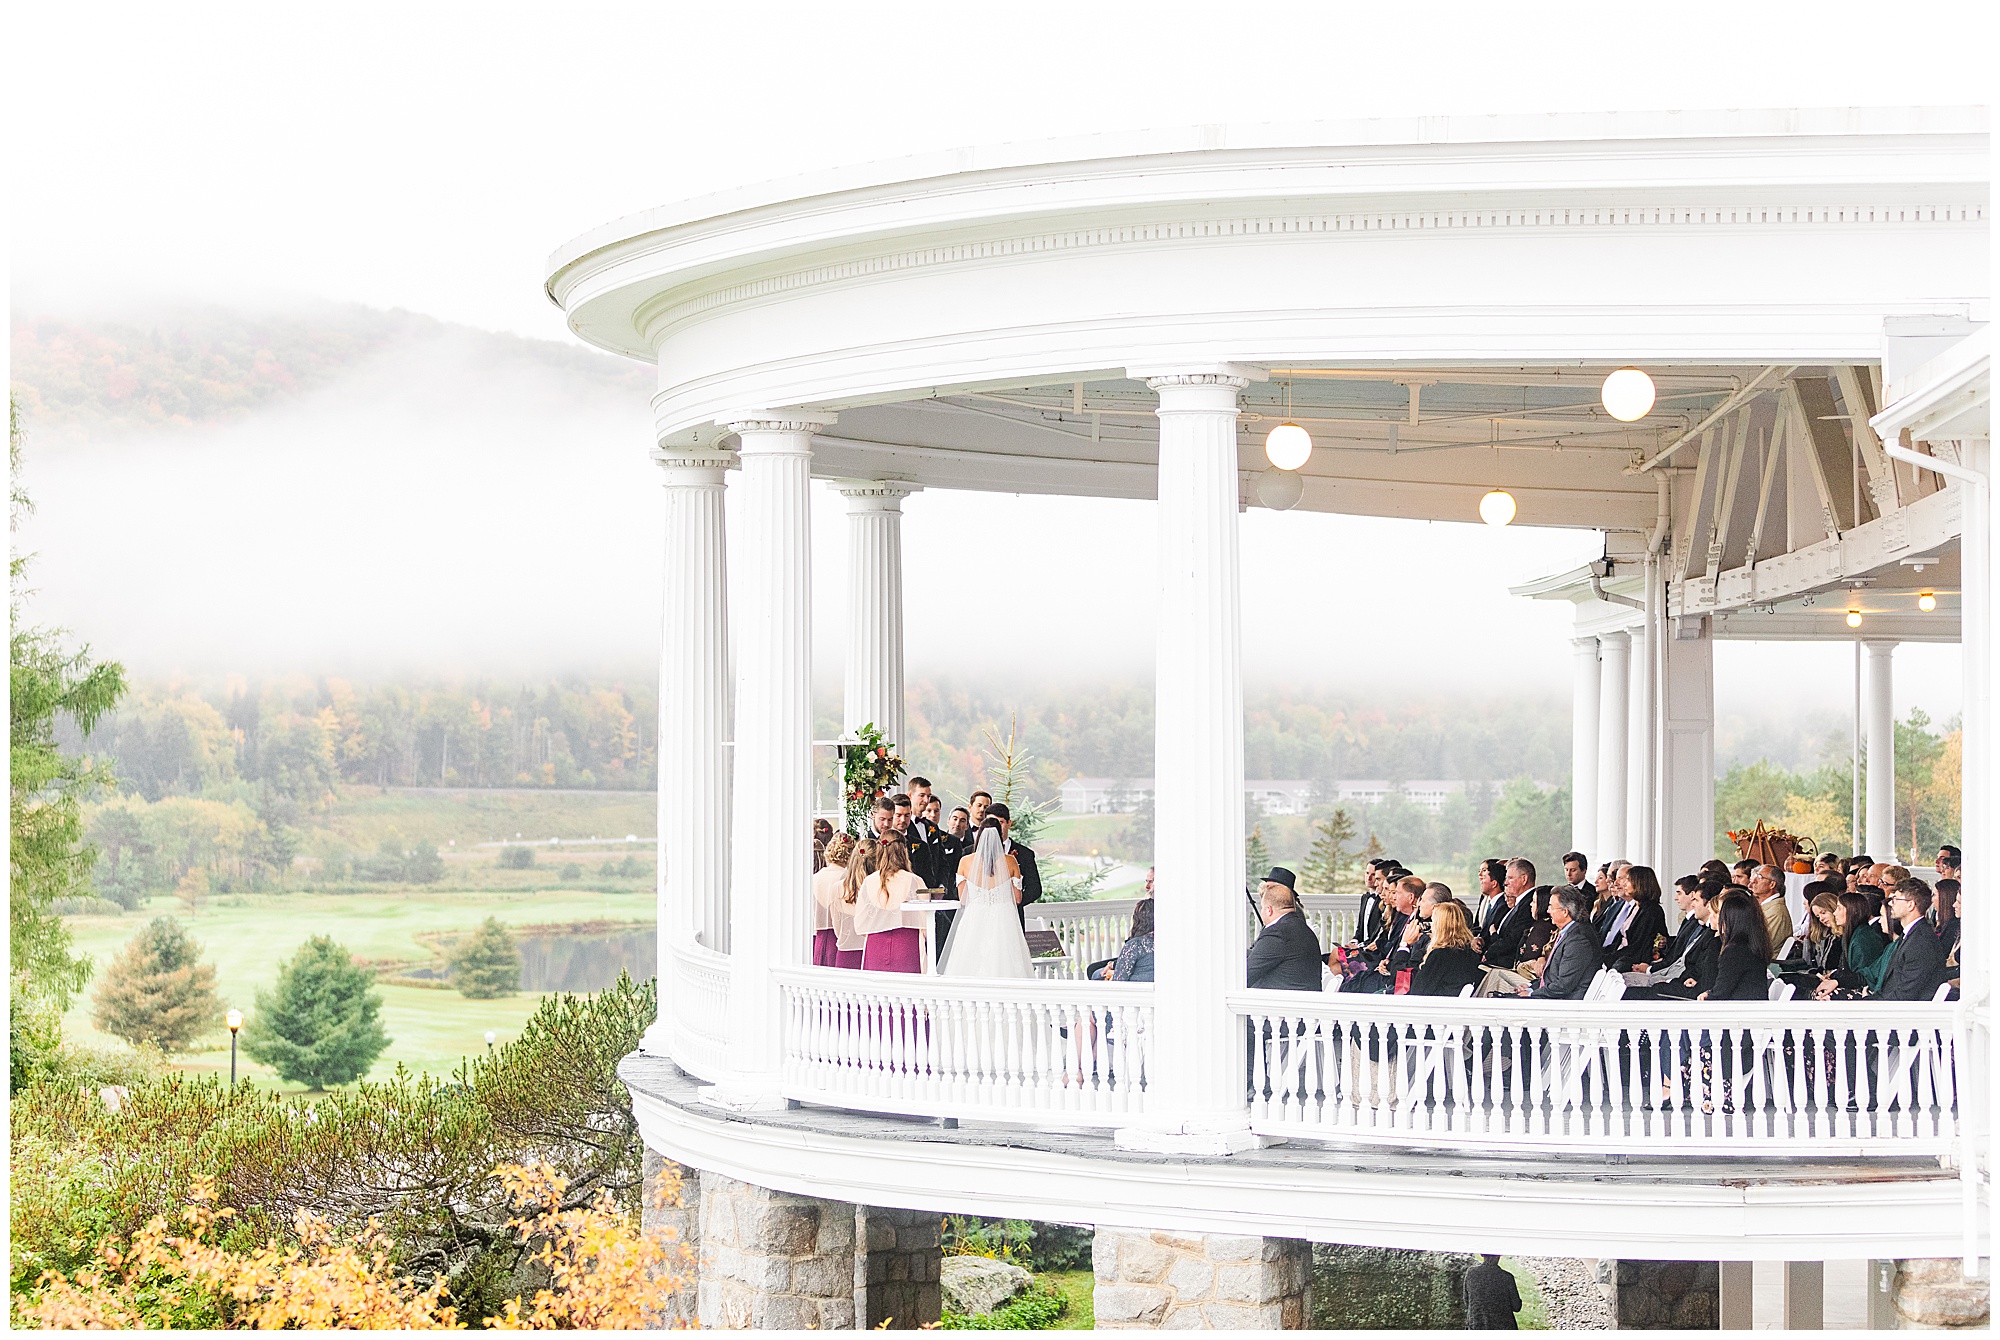 A wedding ceremony on the South Veranda at Mount Washington Resort in the White Mountains of New Hampshire by The Ewings.